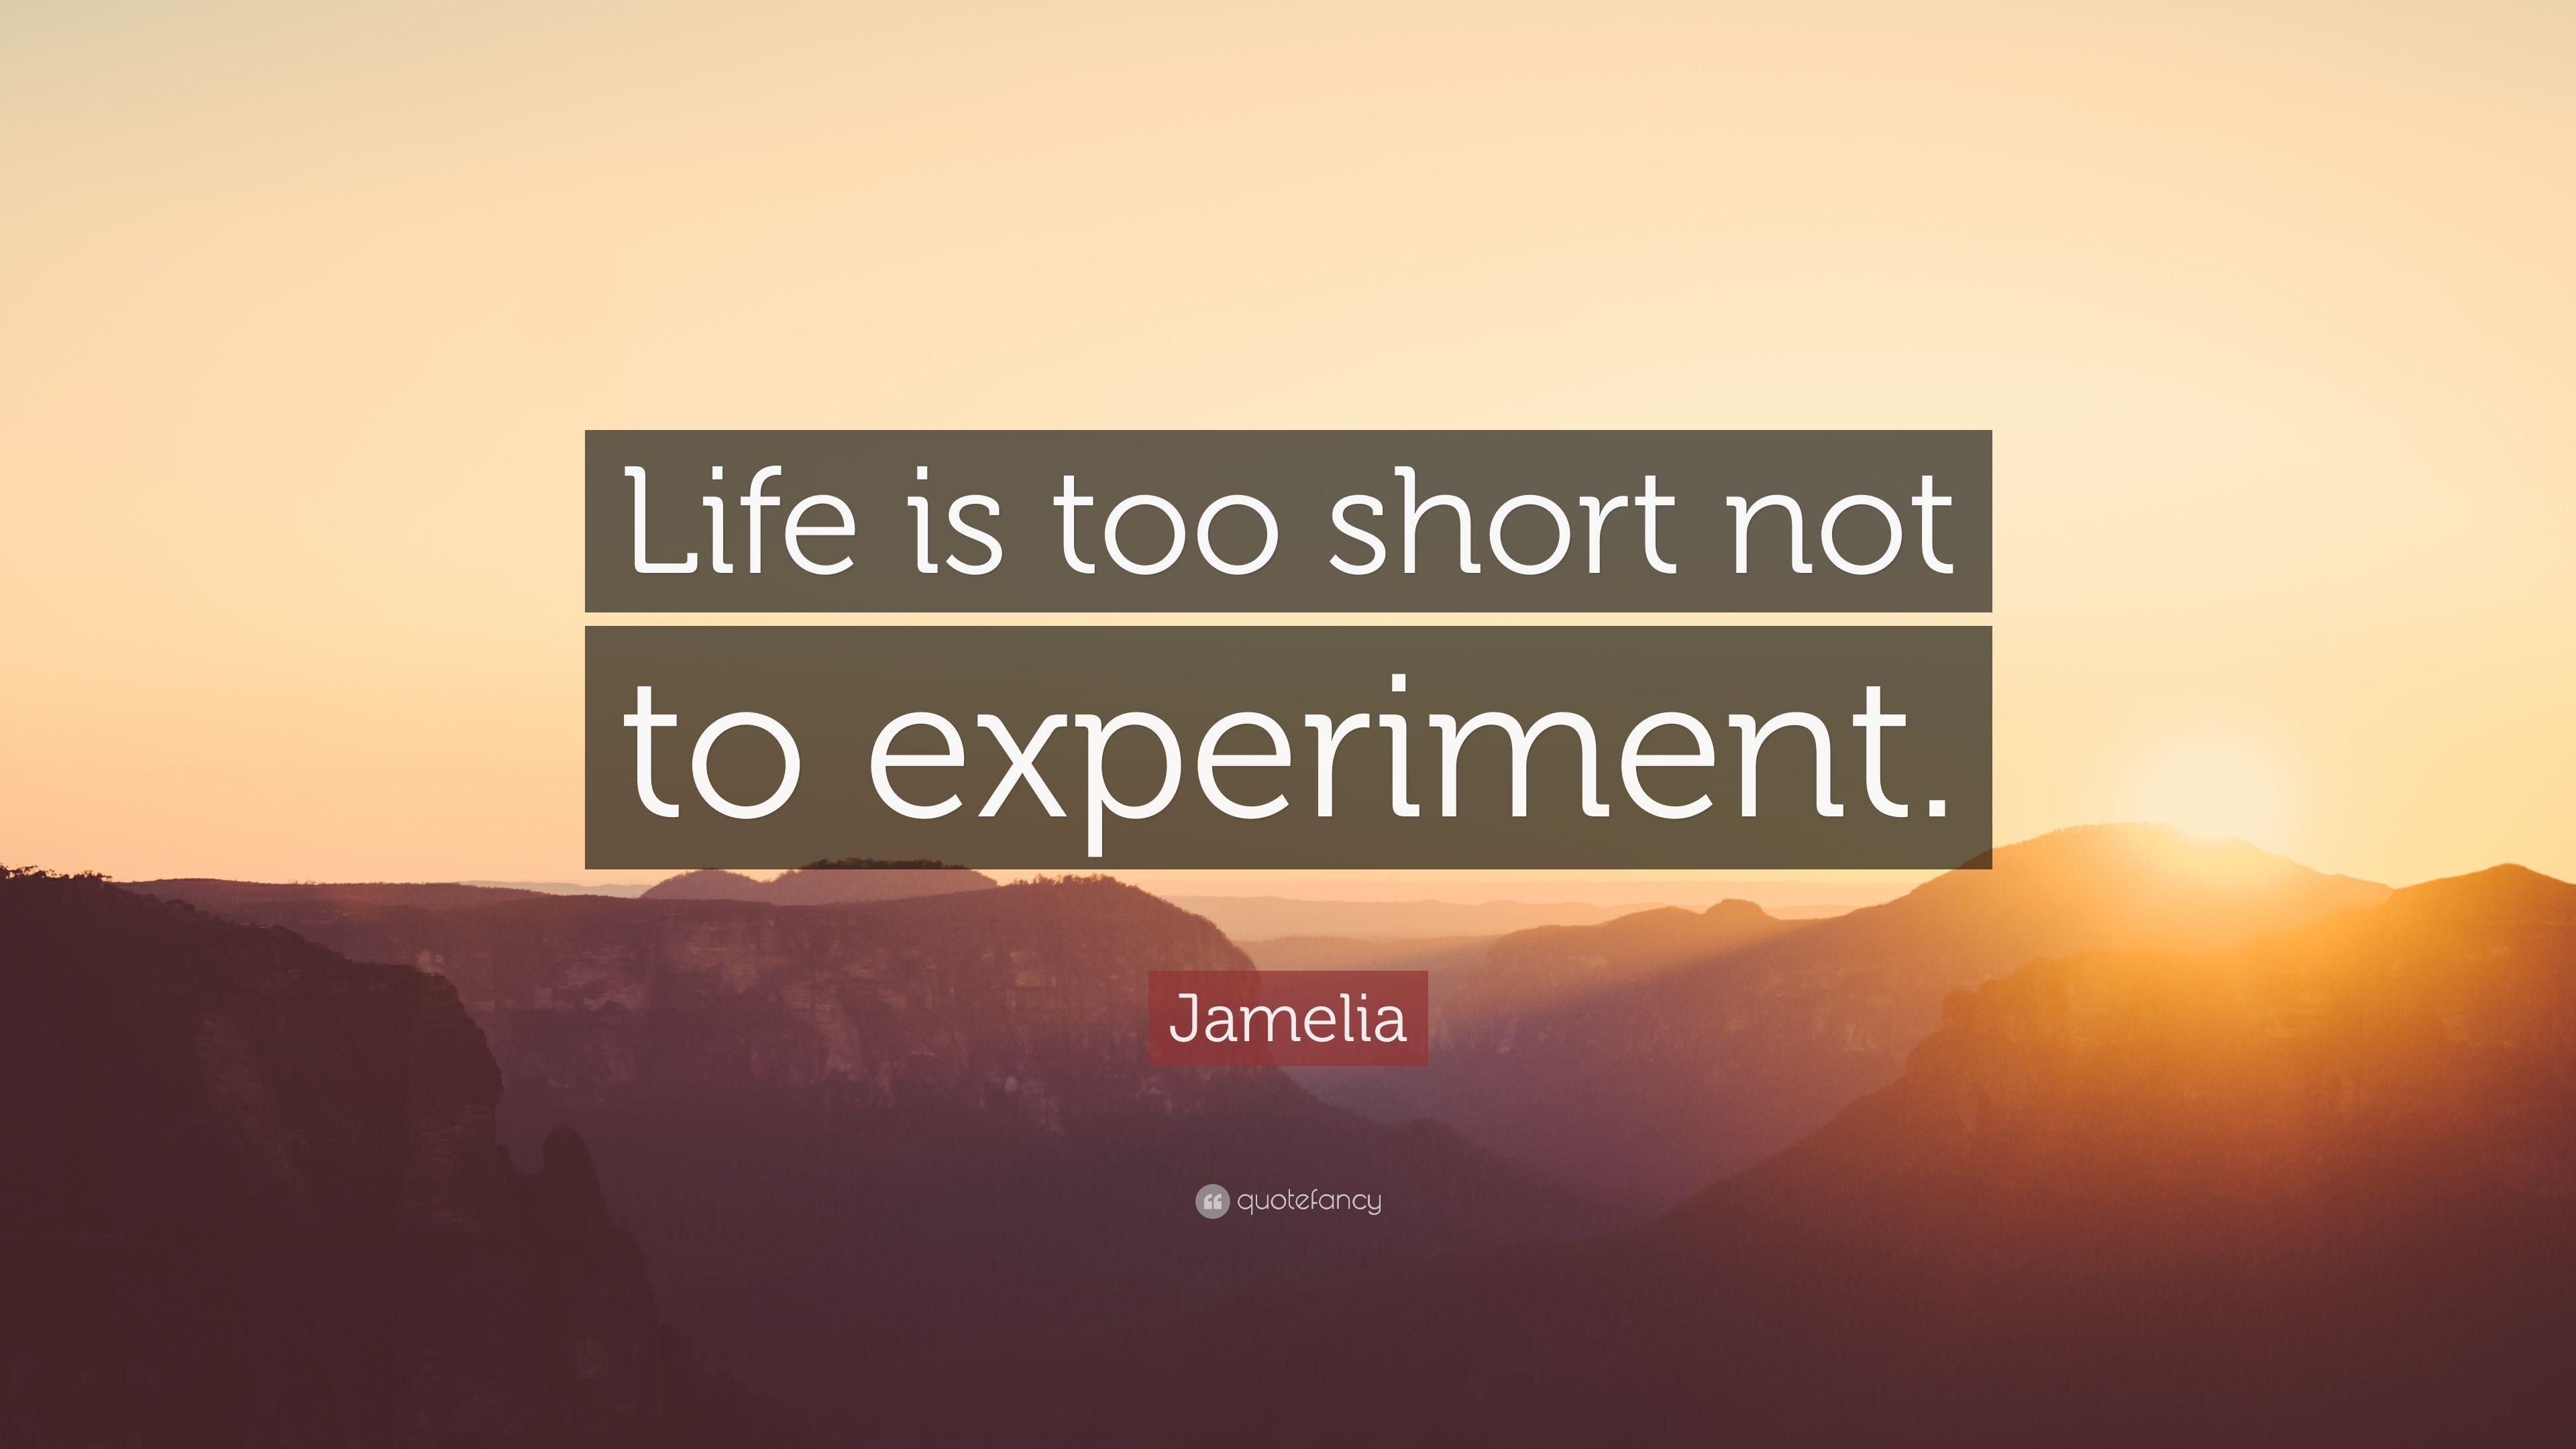 Jamelia Quote: “Life is too short not to experiment.” 12 wallpaper